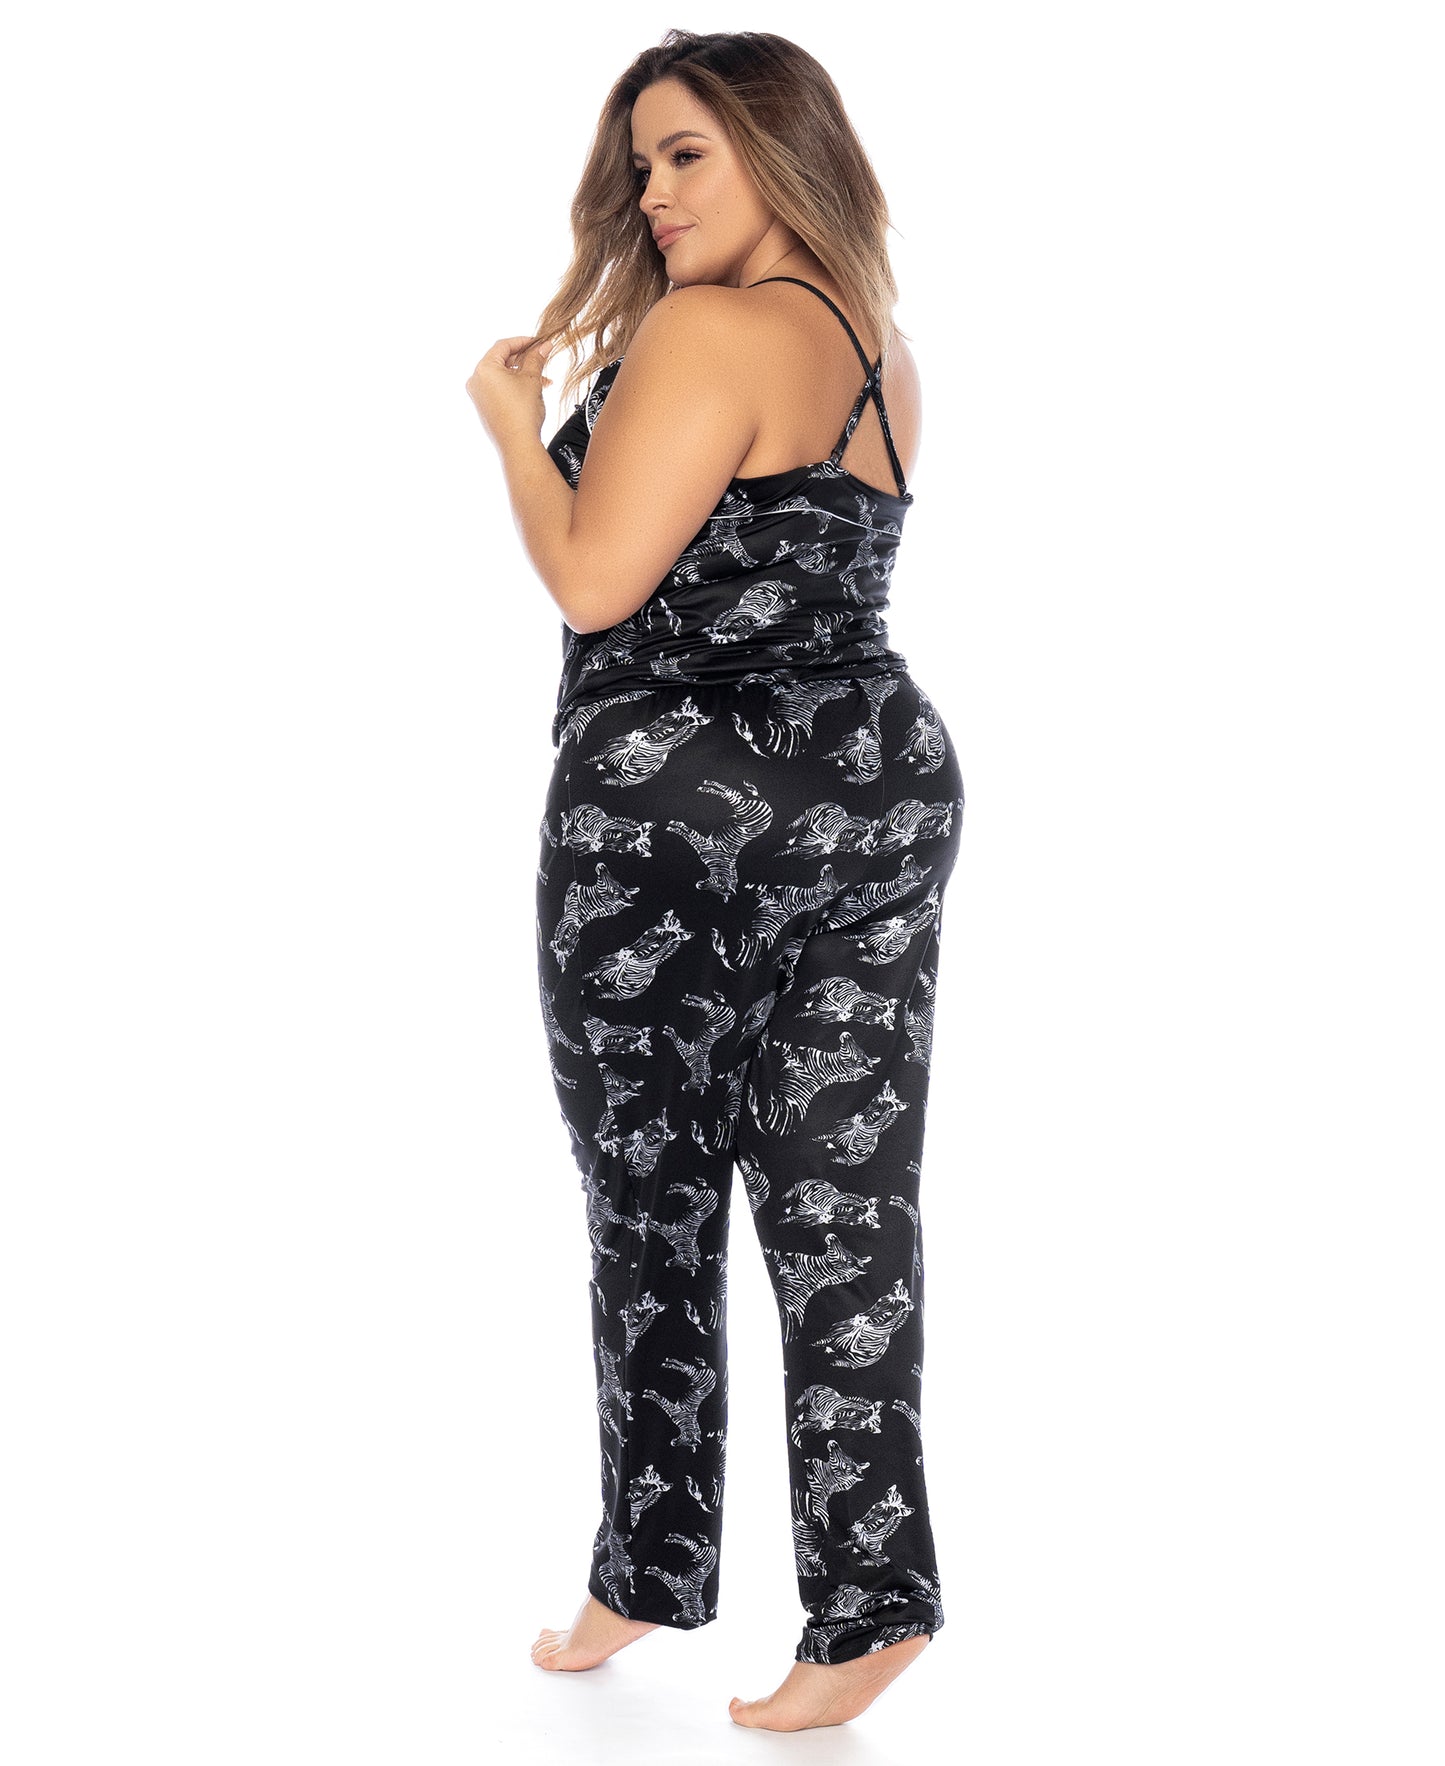 7523X Sophisticated Adult Onesie rear view